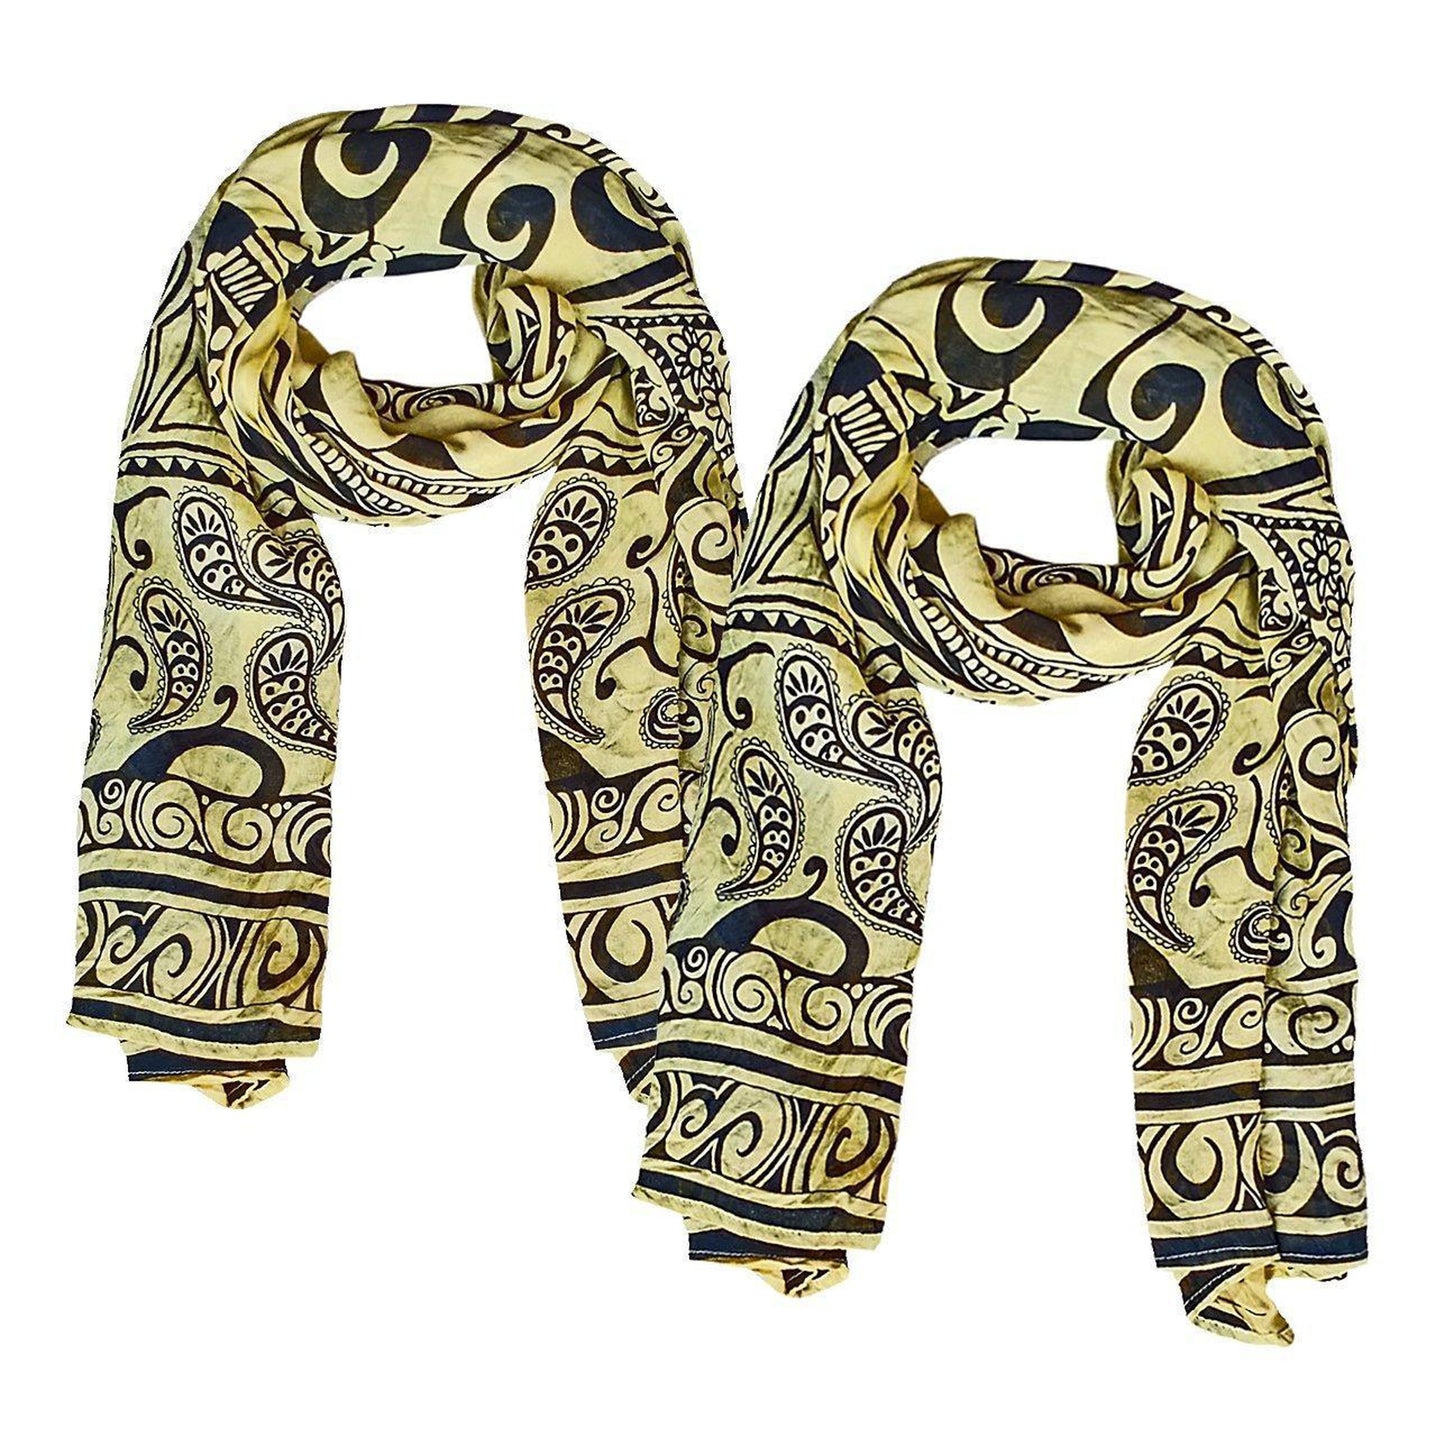 Yellow Monochrome Rayon Scarf/Stole 90x180 cms - The Teal Thread